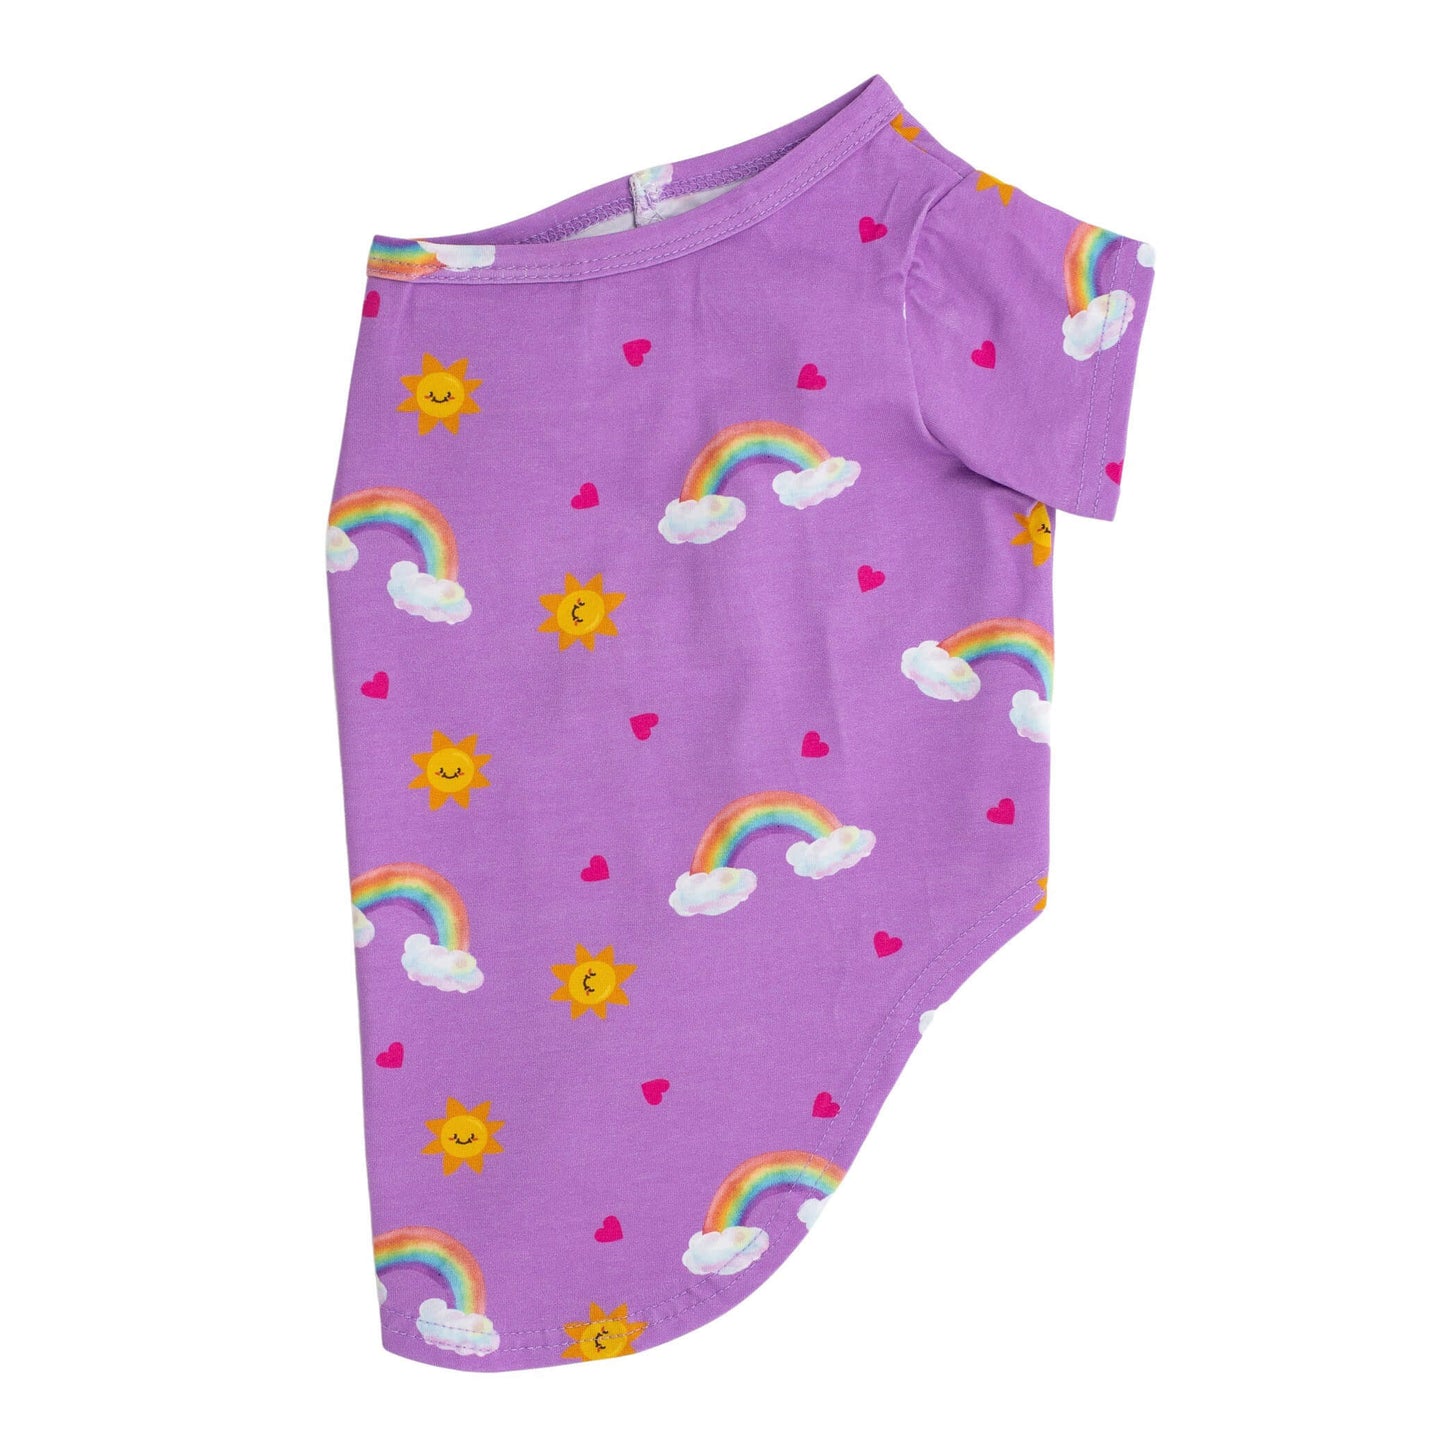 Side flat lay of Vibrant Hound's Chasing Rainbow dog pajamas. These pyjamas are purple with rainbows, bright suns, and love hearts printed on it.